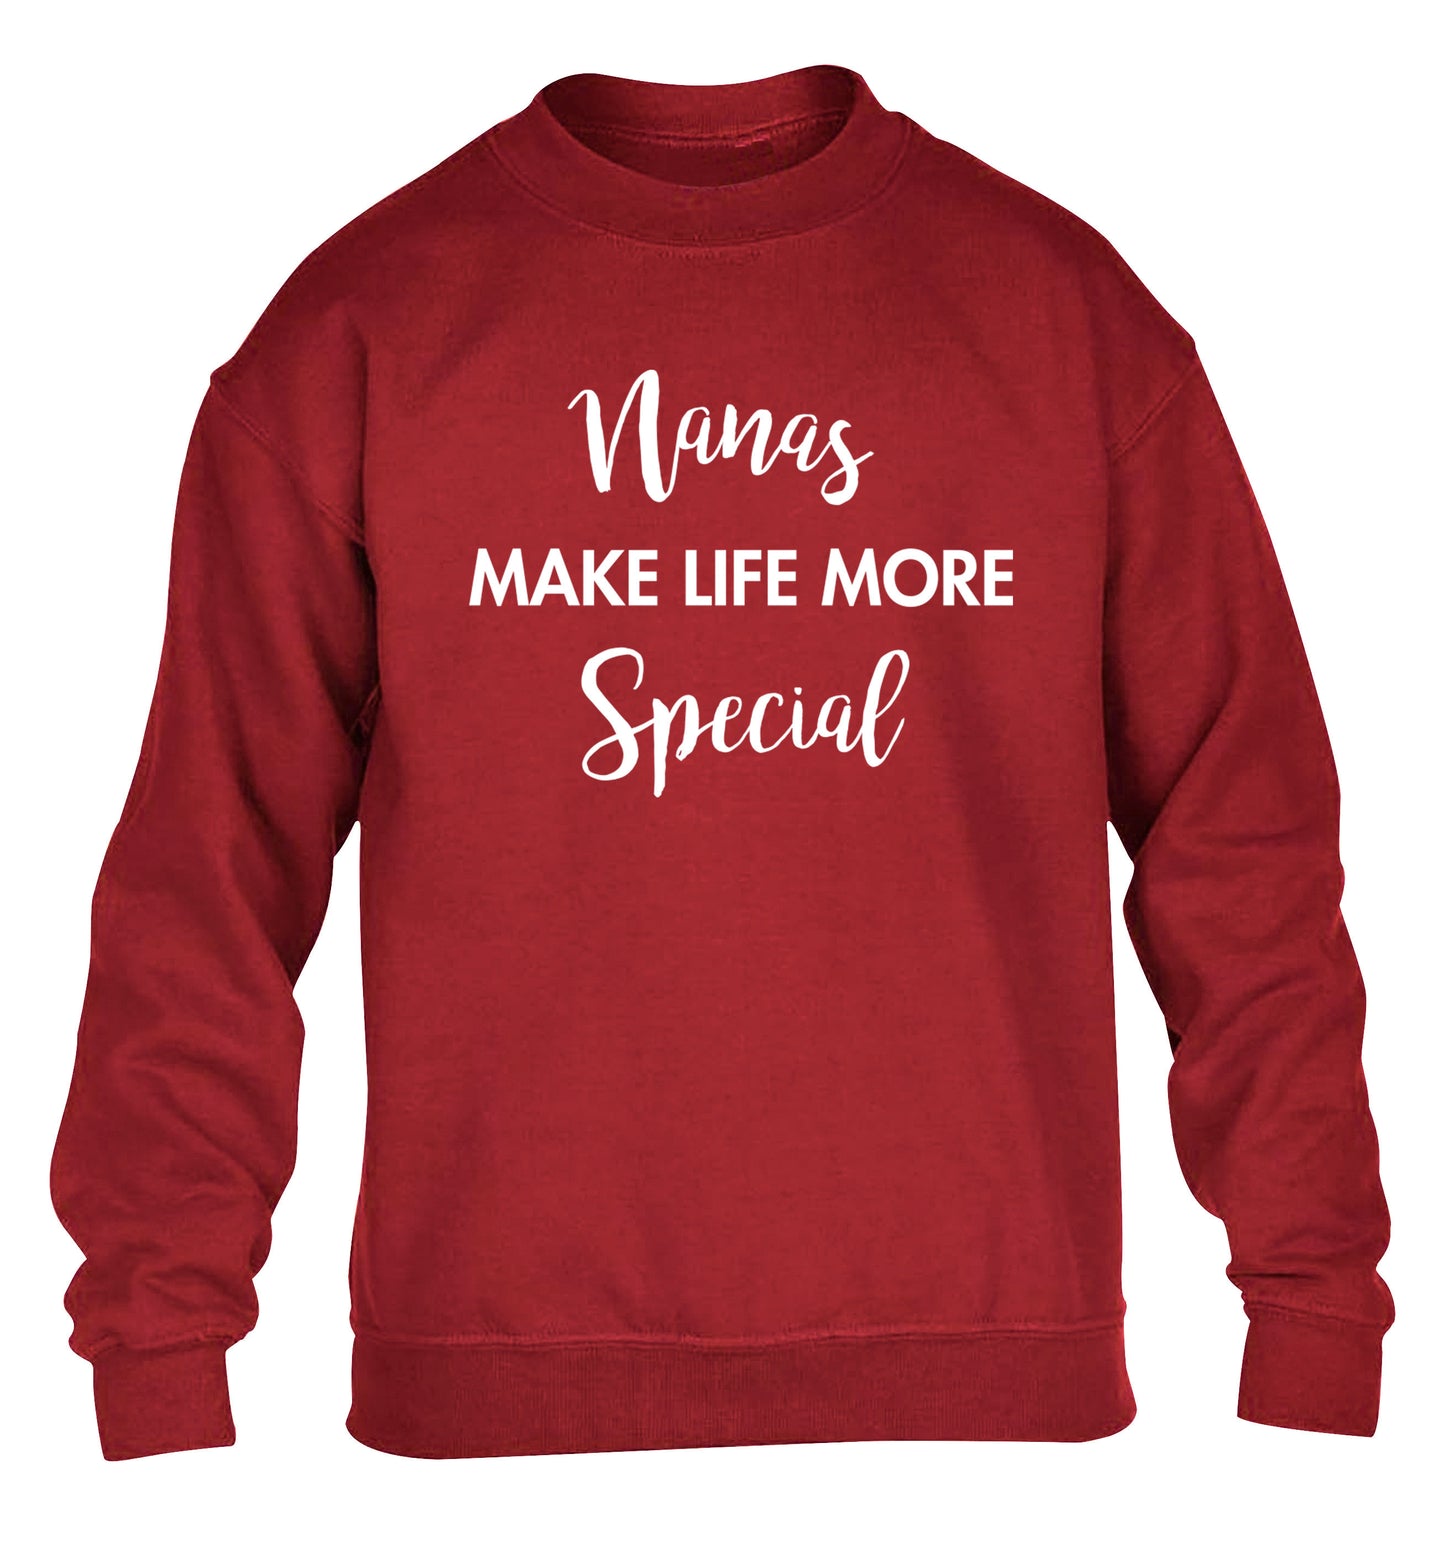 Nanas make life more special children's grey sweater 12-14 Years